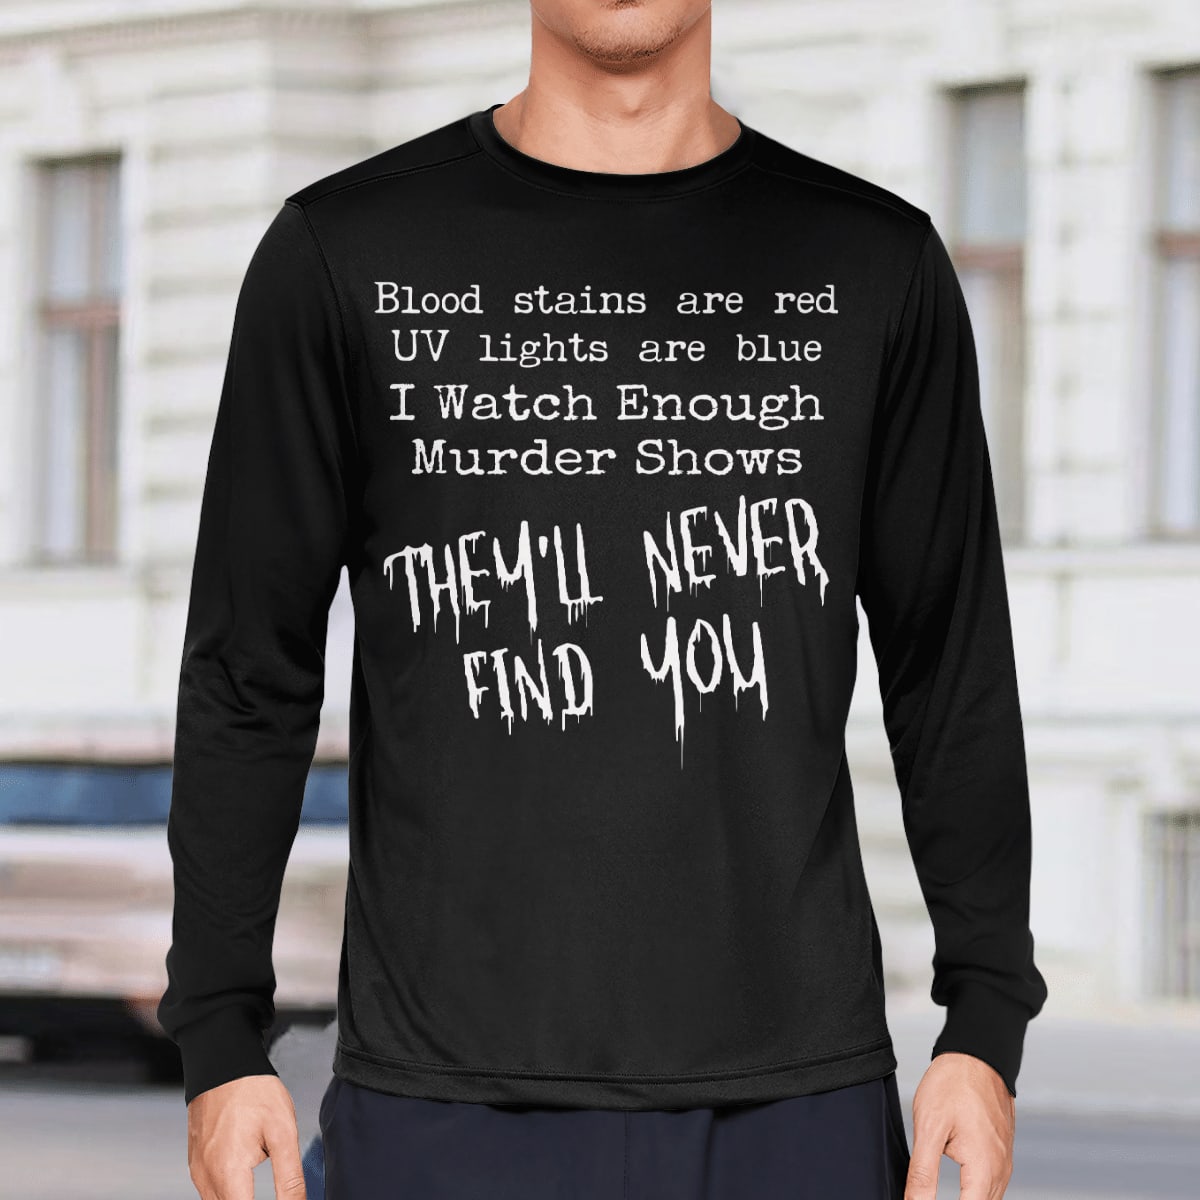 Blood Stains Are Red Uv Lights Are Blue I Watch Enough Murder Shows, They'll Never Find You T-Shirt